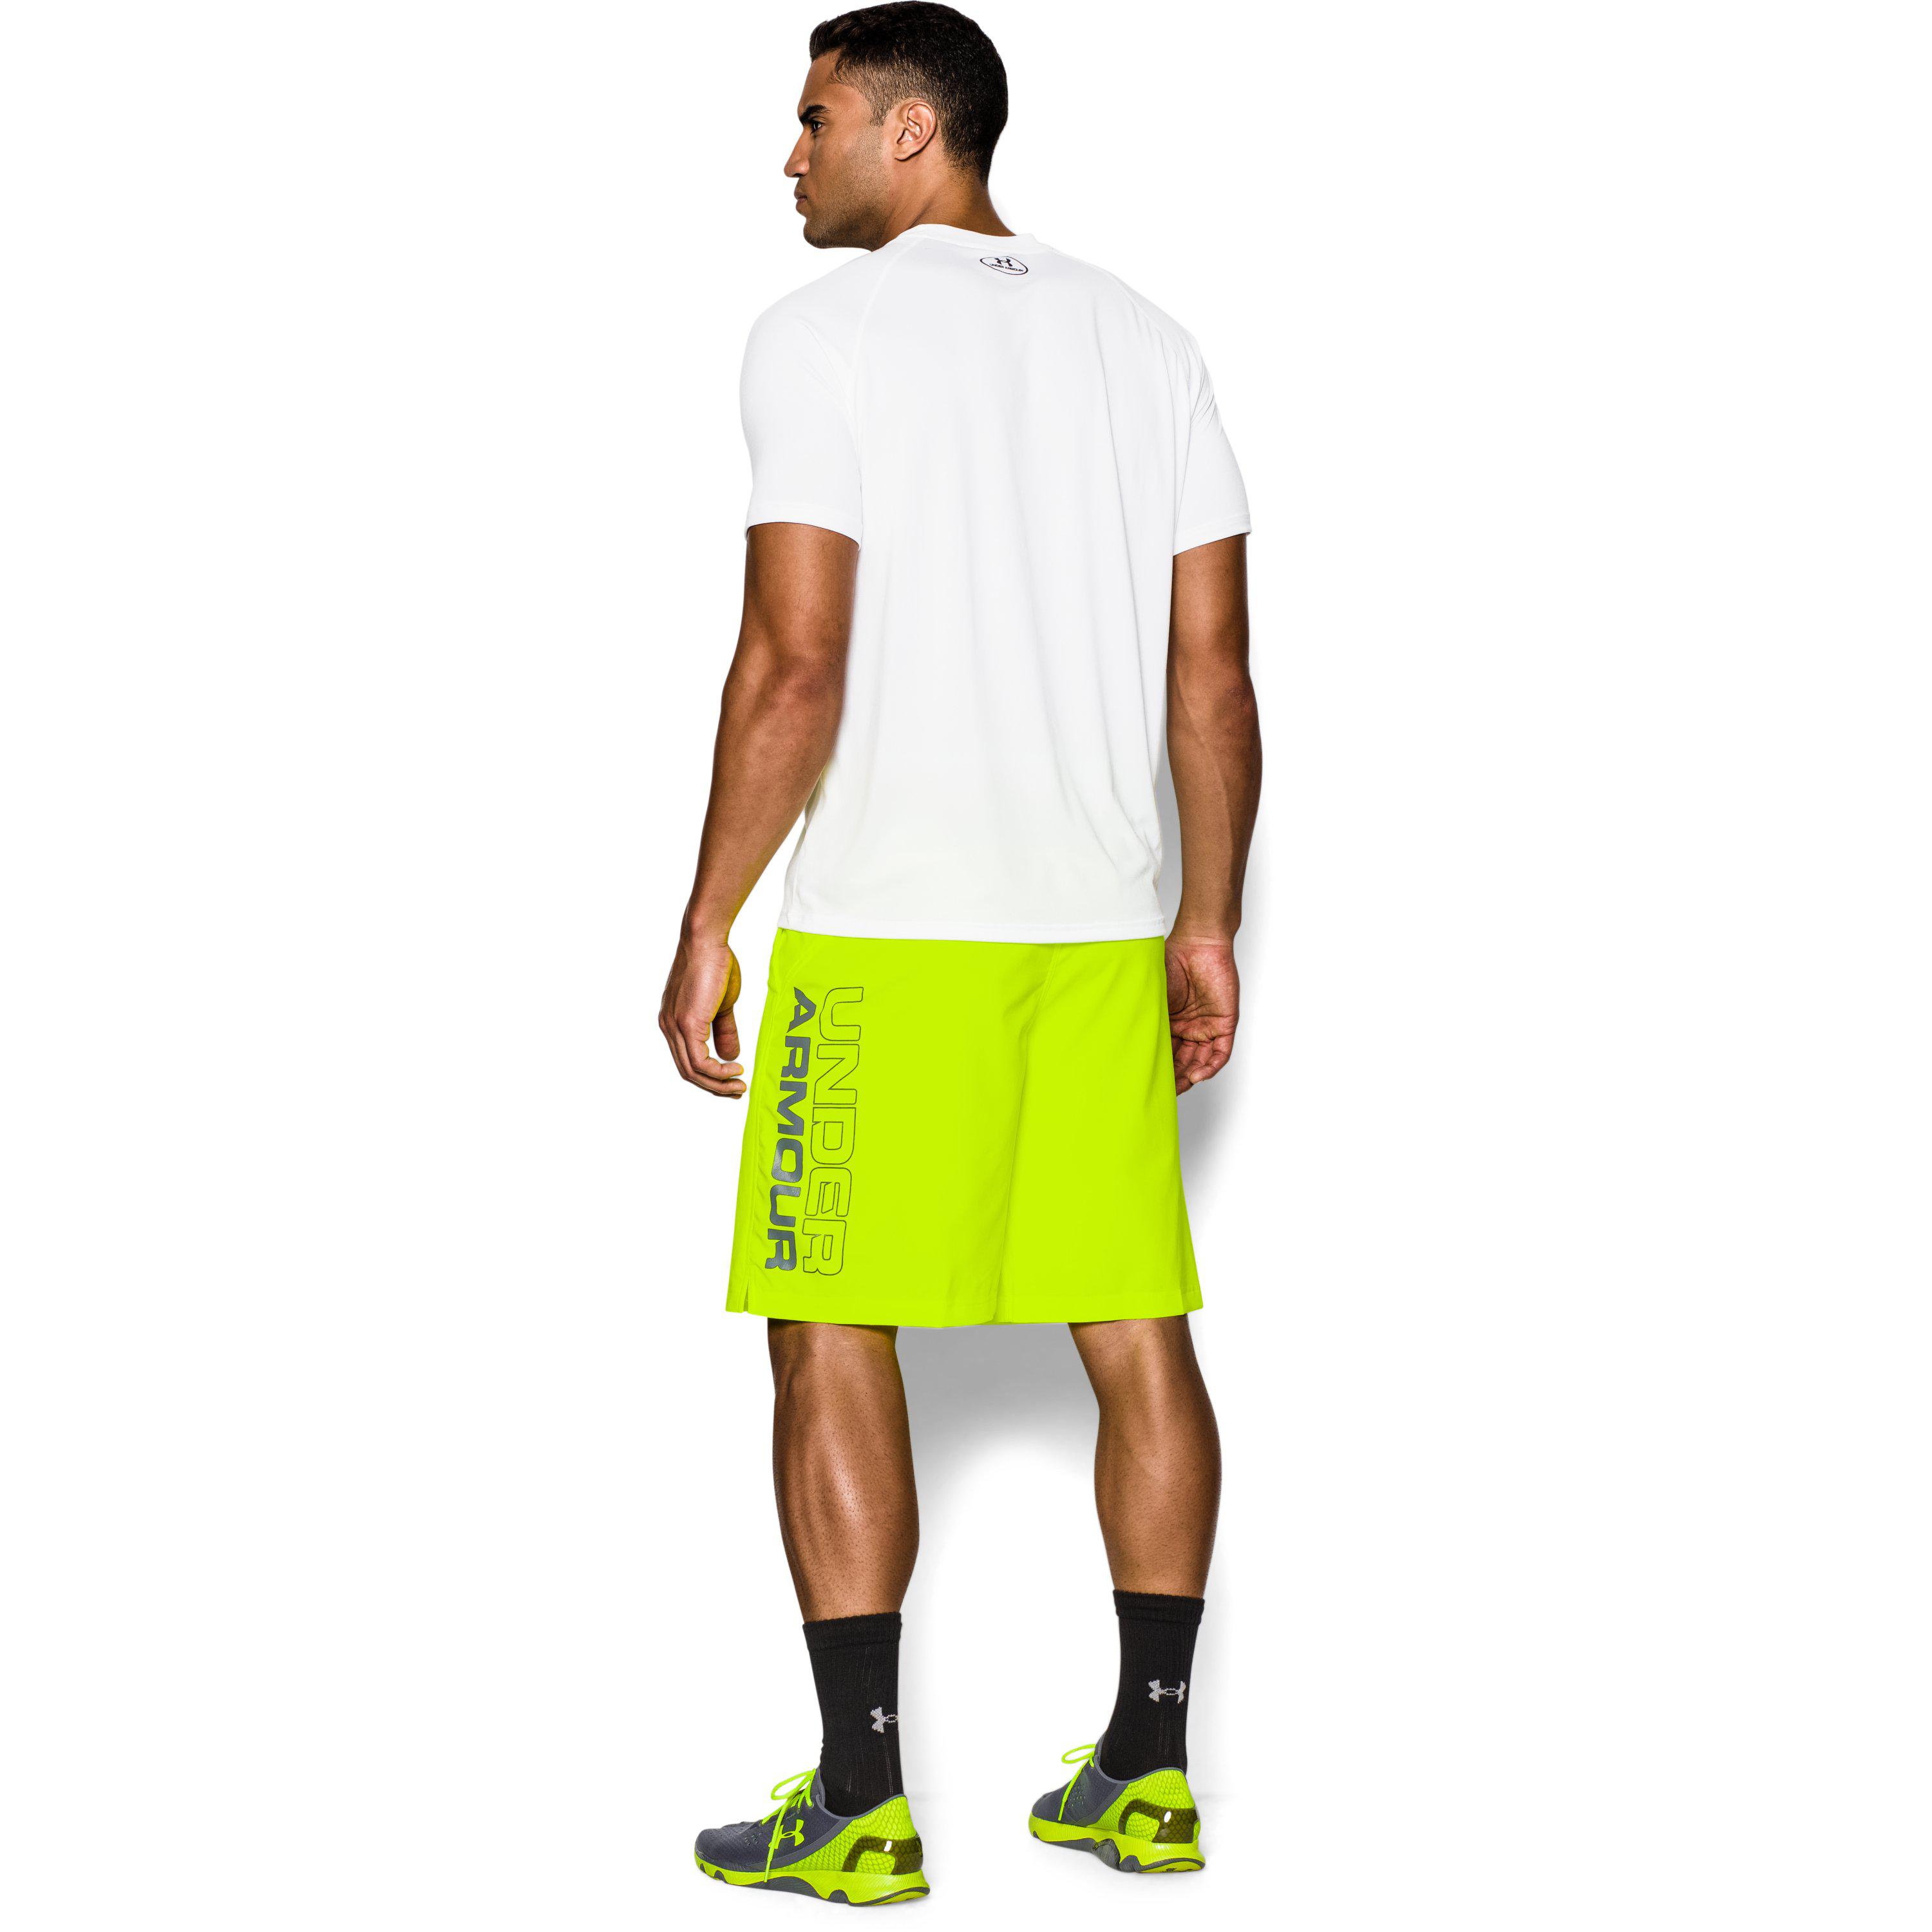 under armour hiit woven shorts